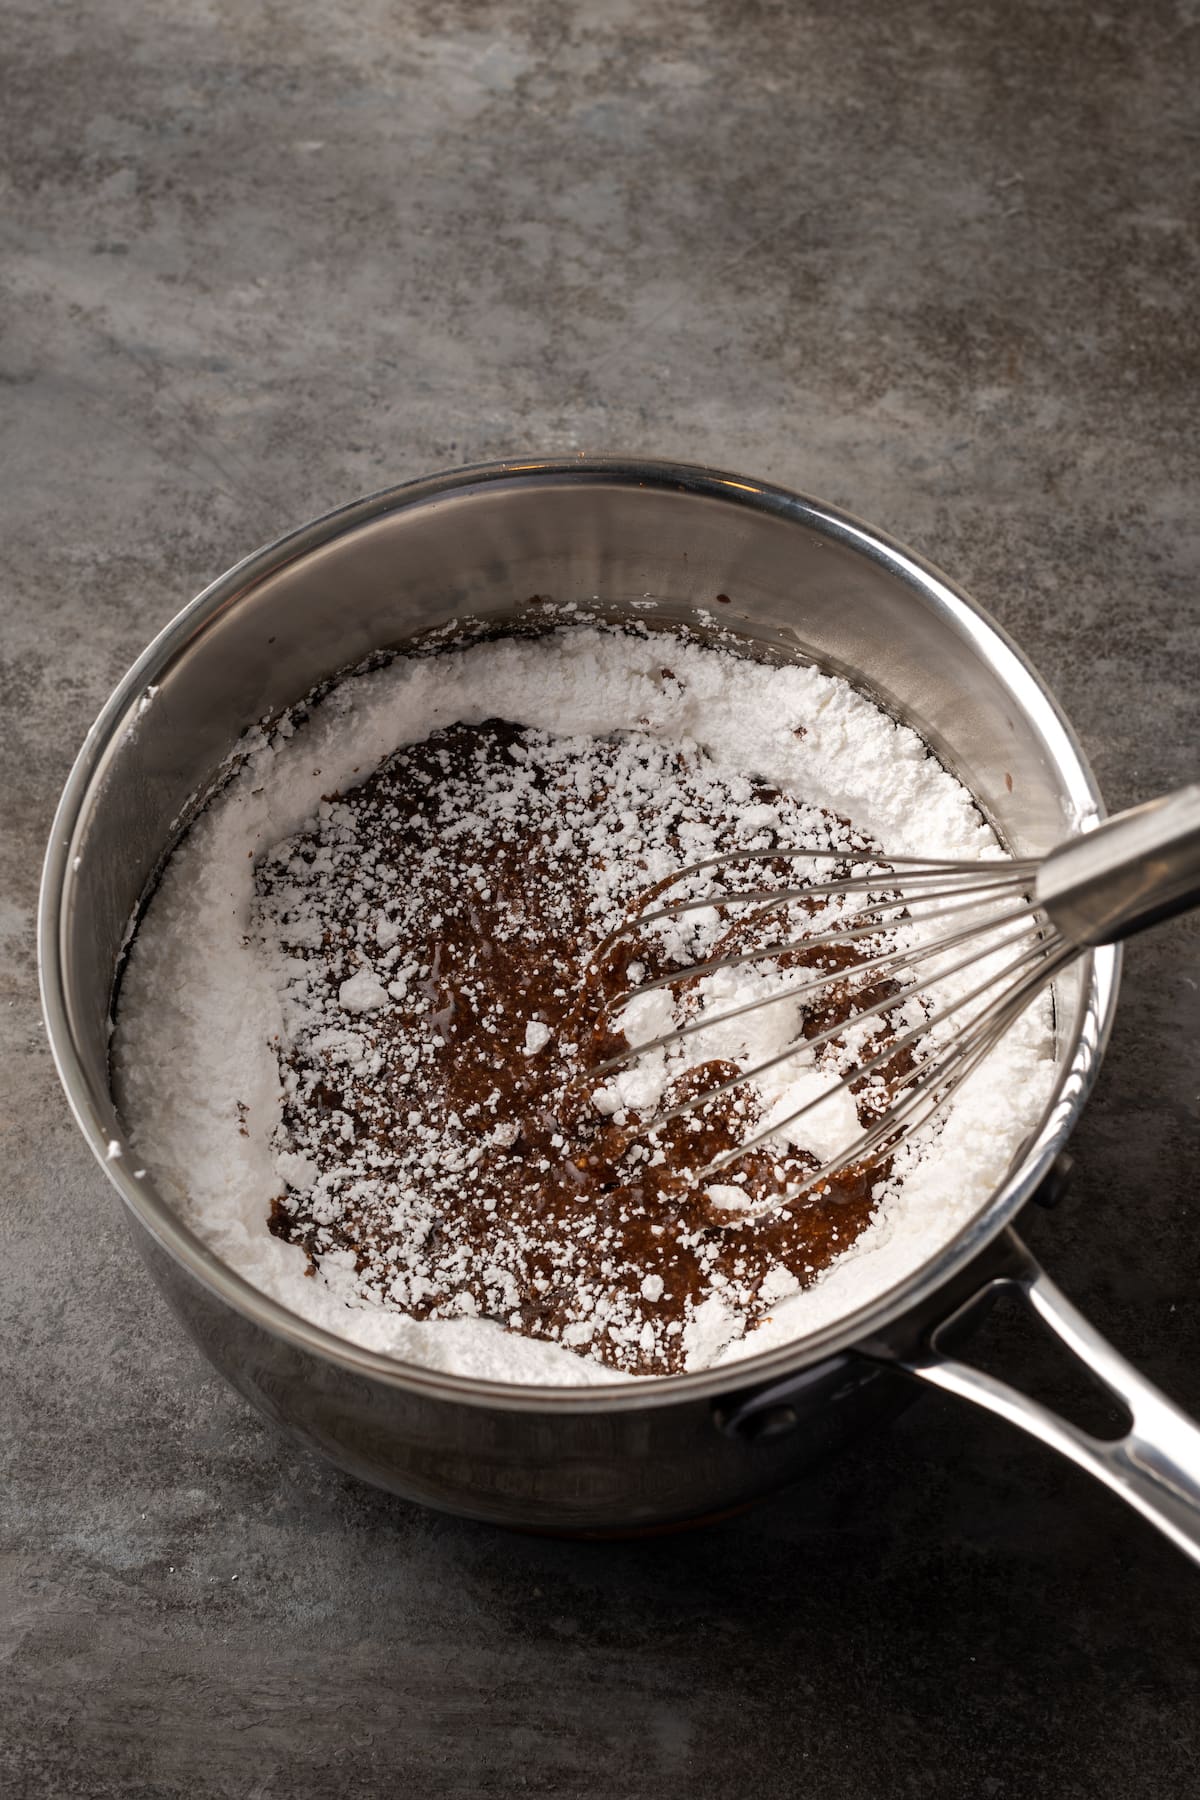 Powdered sugar and vanilla is whisked into the cocoa mixture in a saucepan.